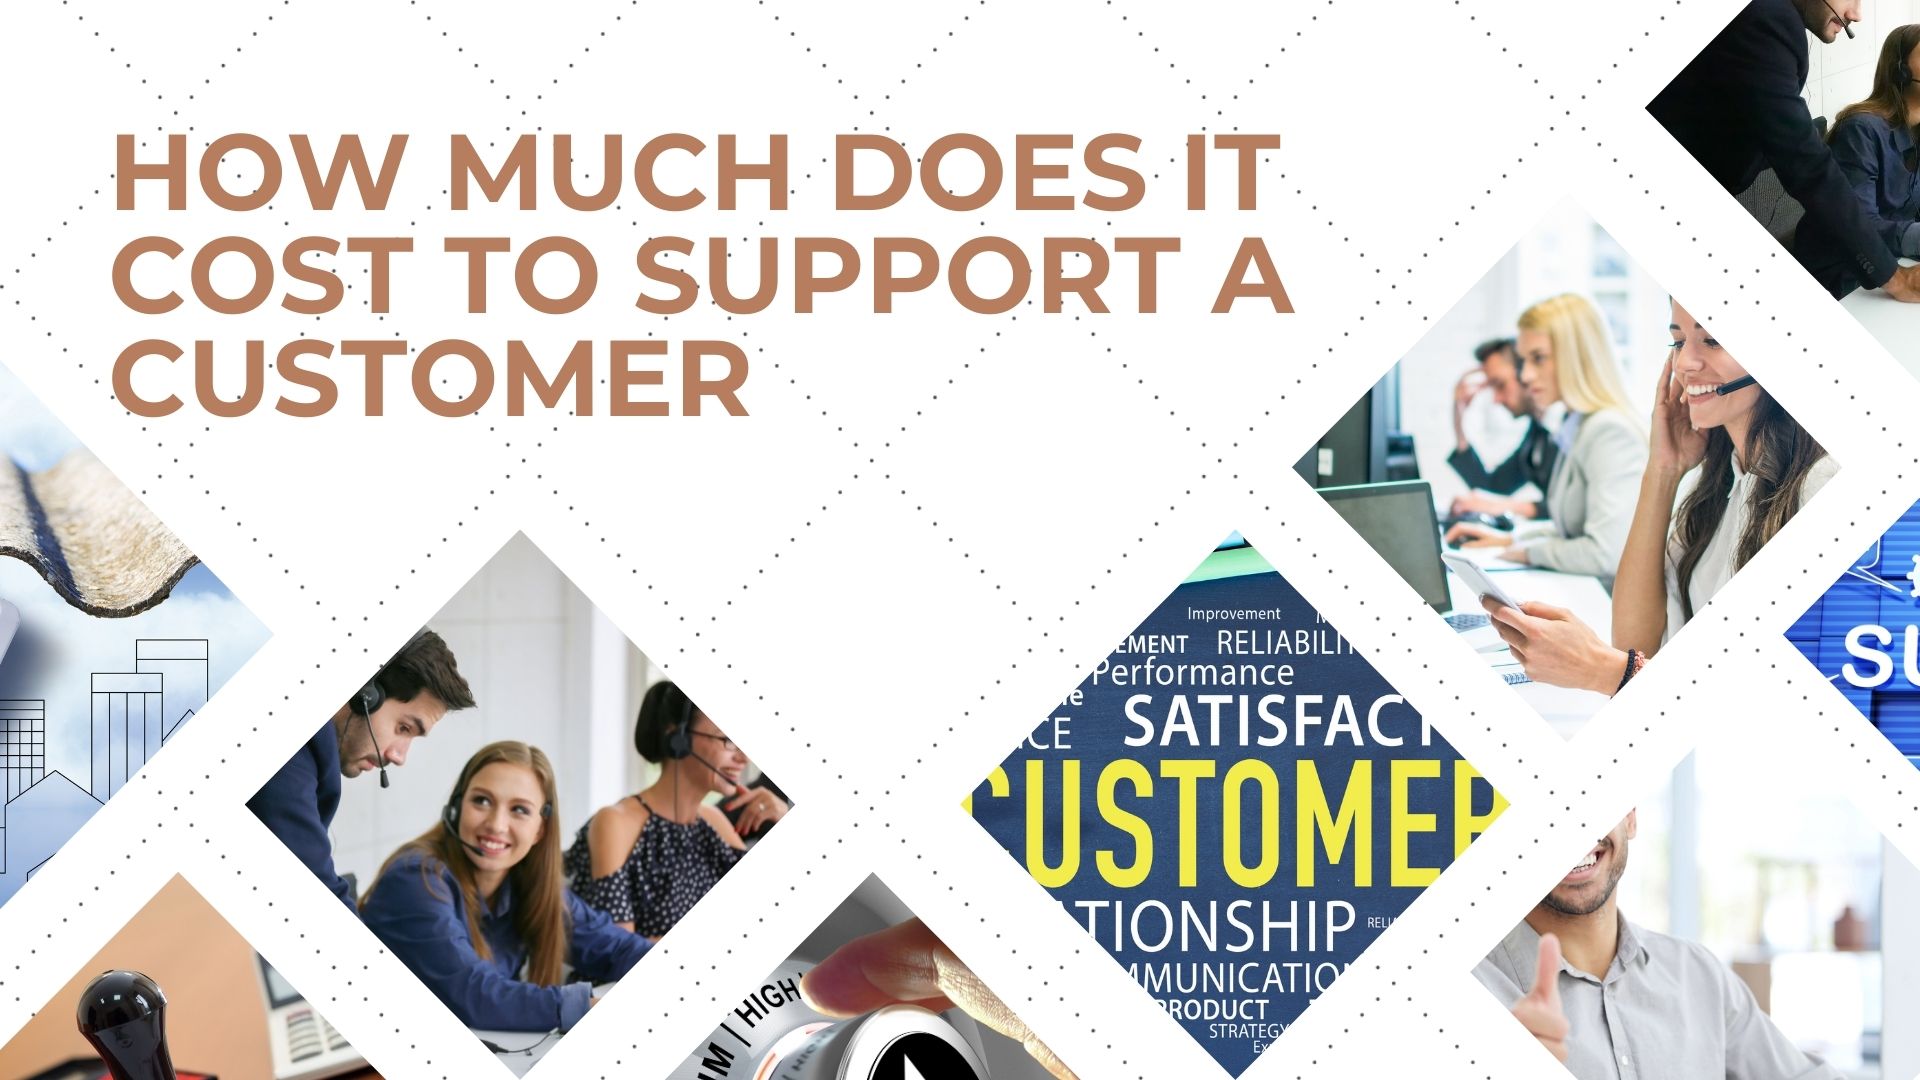 How Much Does It Cost to Support a Customer